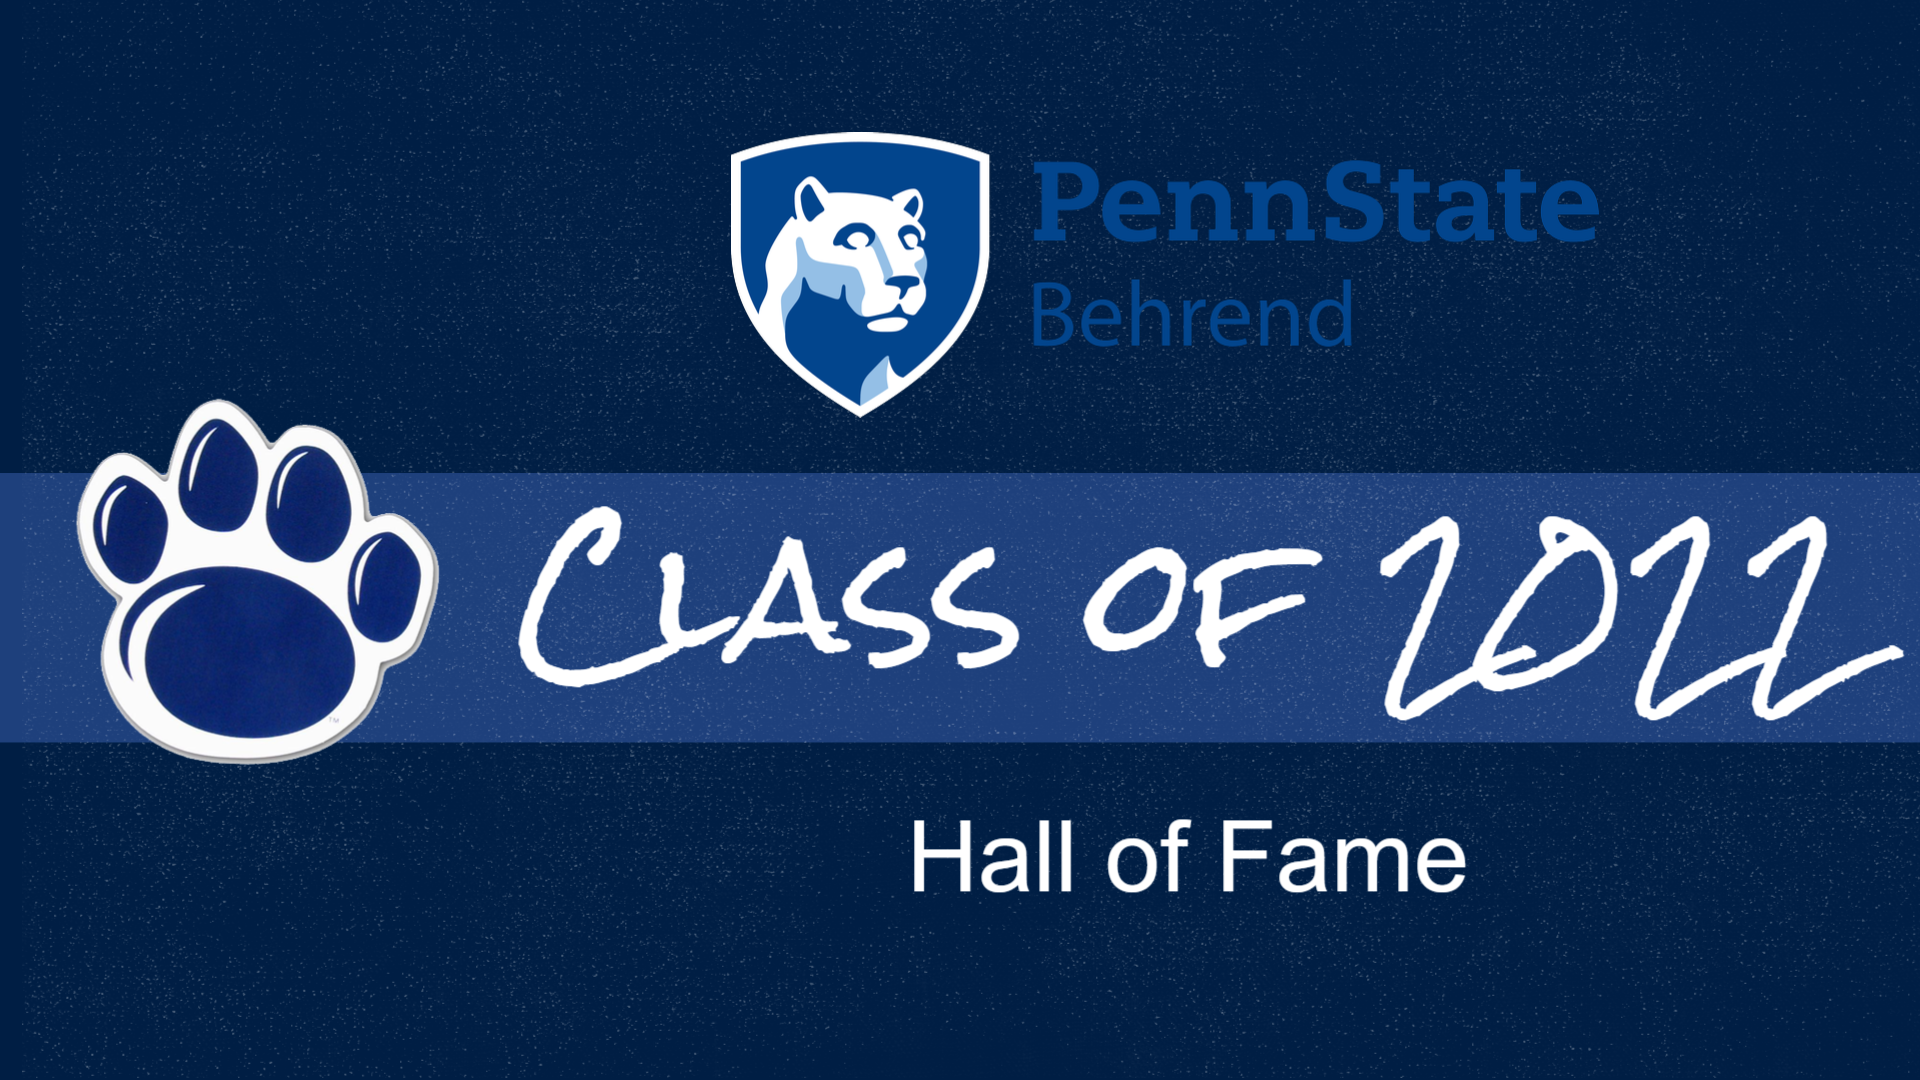 Behrend Athletics Announces Hall of Fame Class of 2022